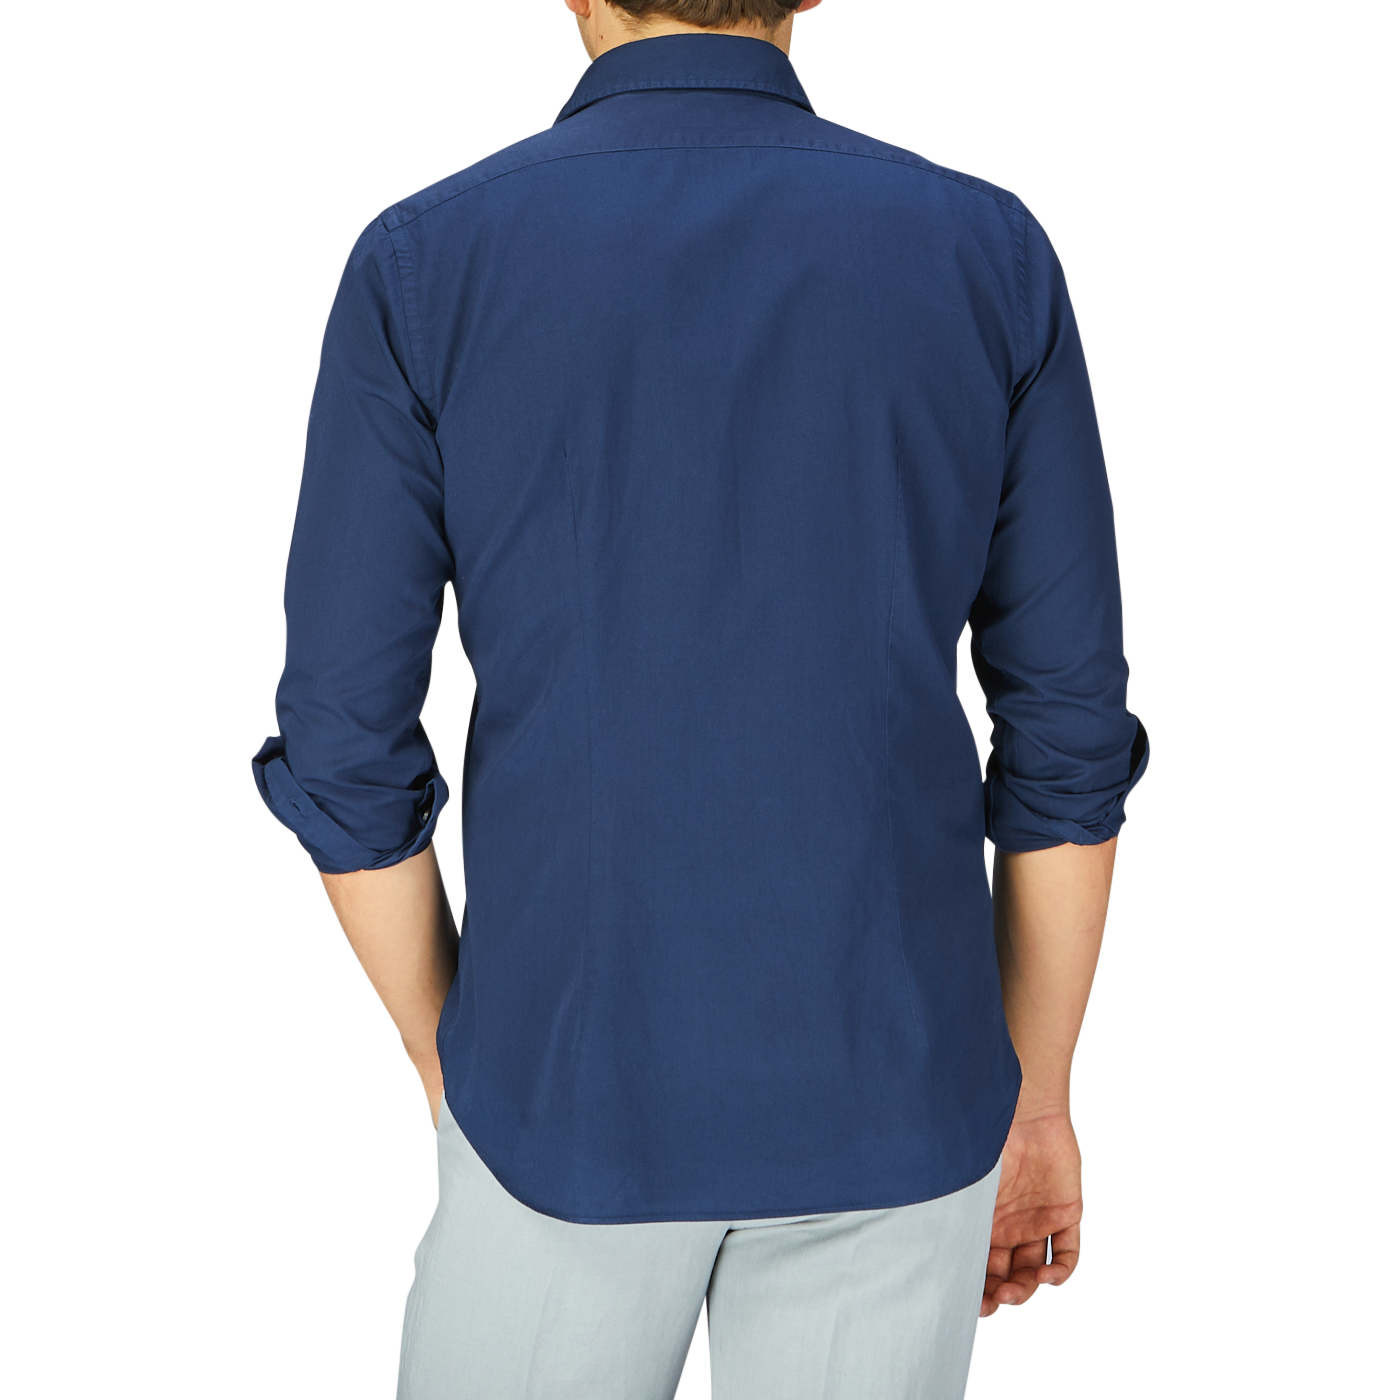 A man seen from behind wearing a rolled-up sleeve Xacus navy blue cotton twill tailor fit shirt and light-colored pants.